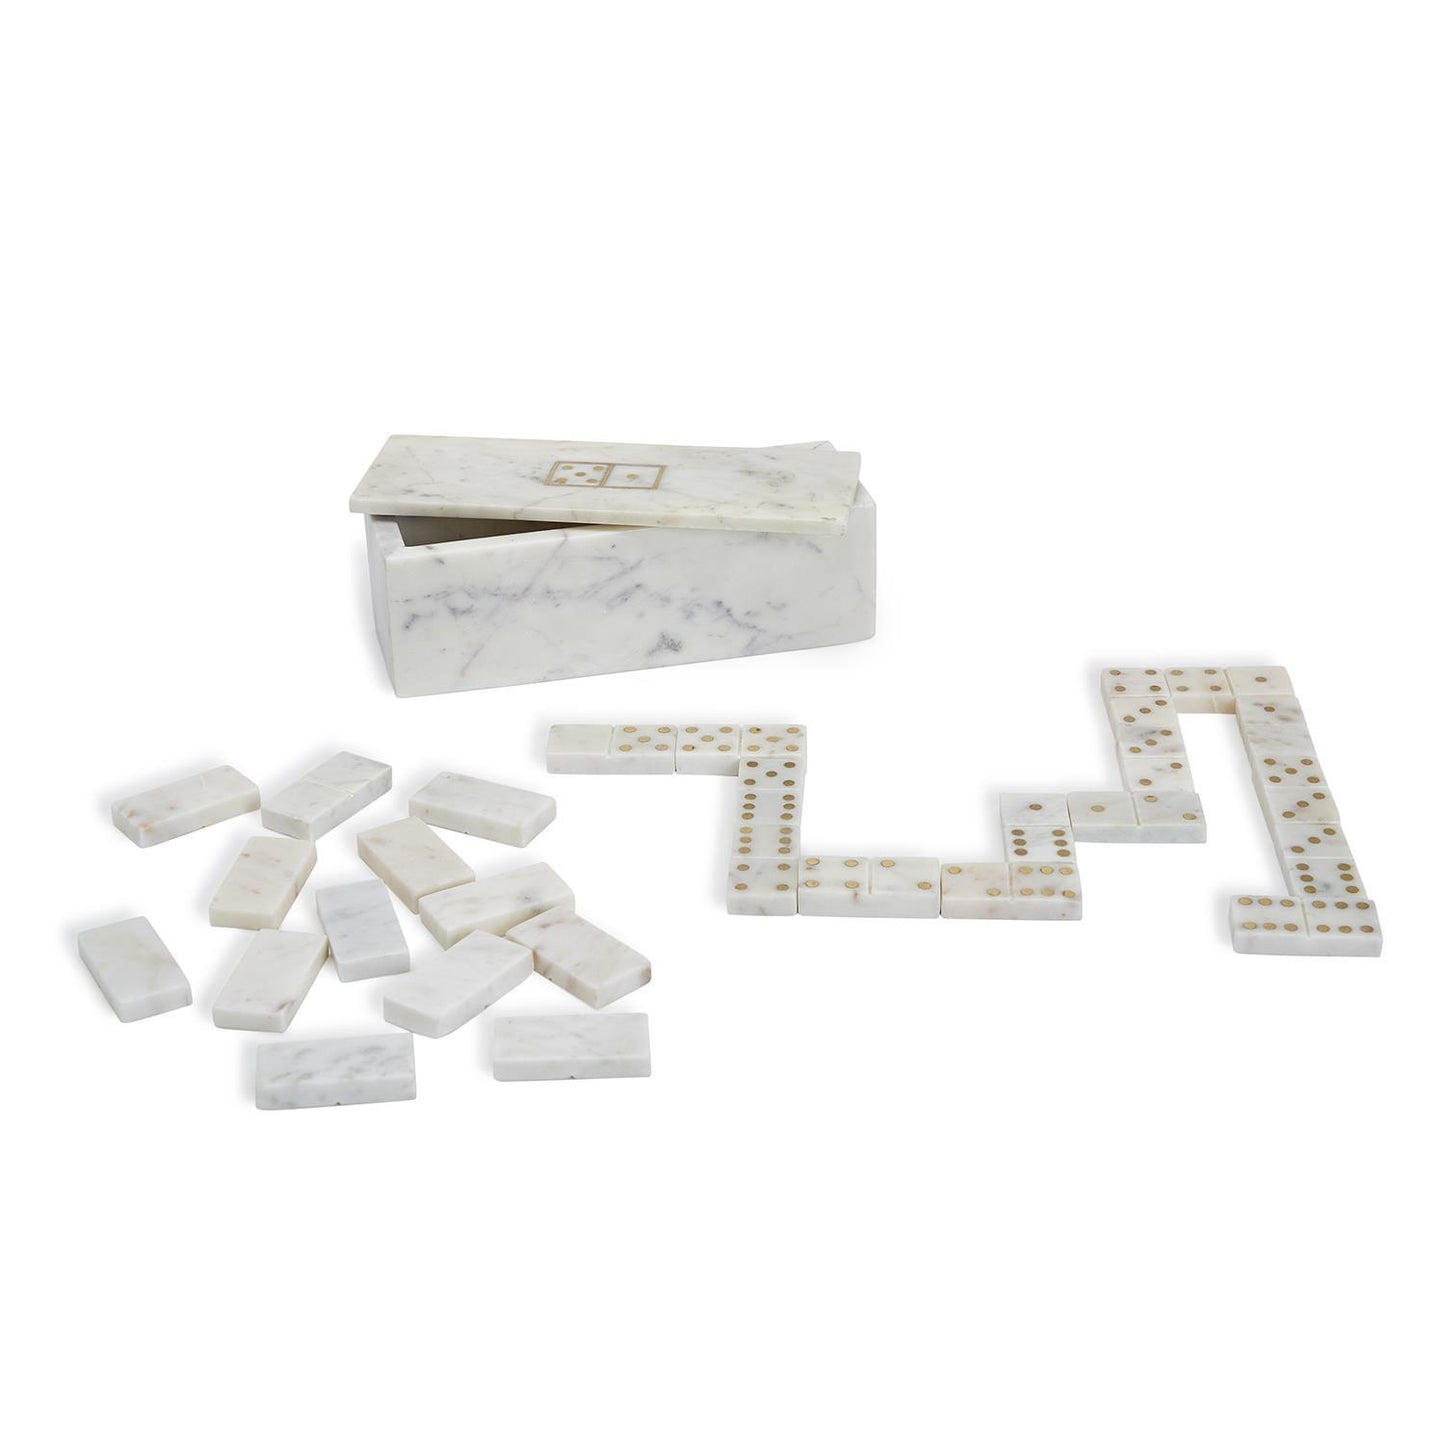 Two's Company Blanc De Blanc 28 Pc Gold Dot Domino Set In Covered Storage Box.